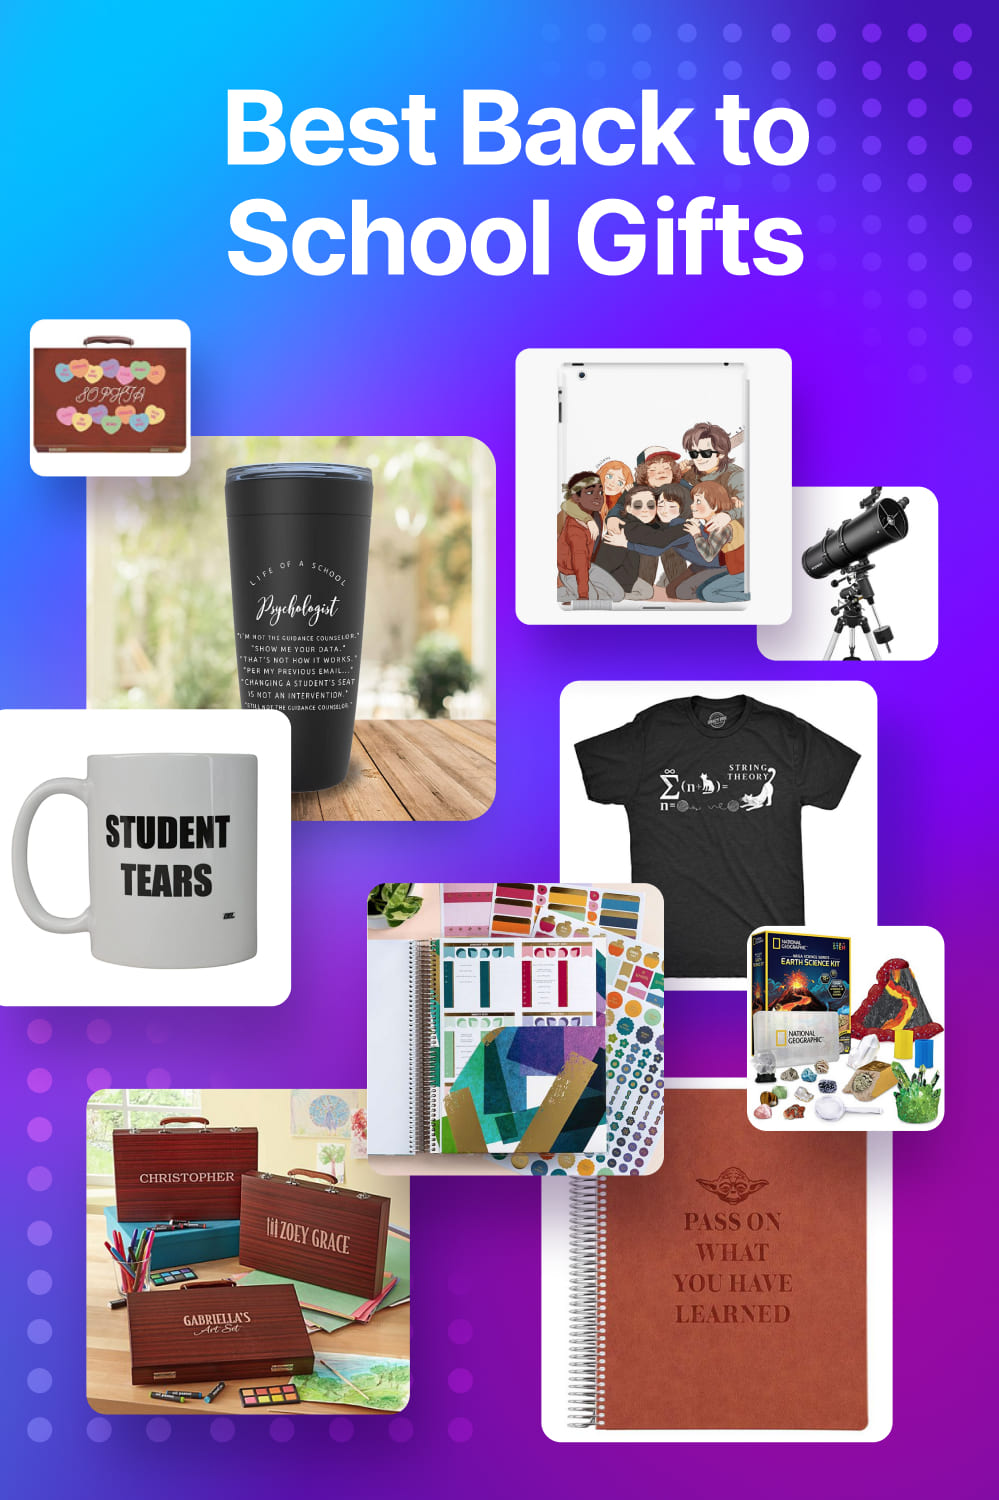 Best back to school gifts. Pinterest collage.